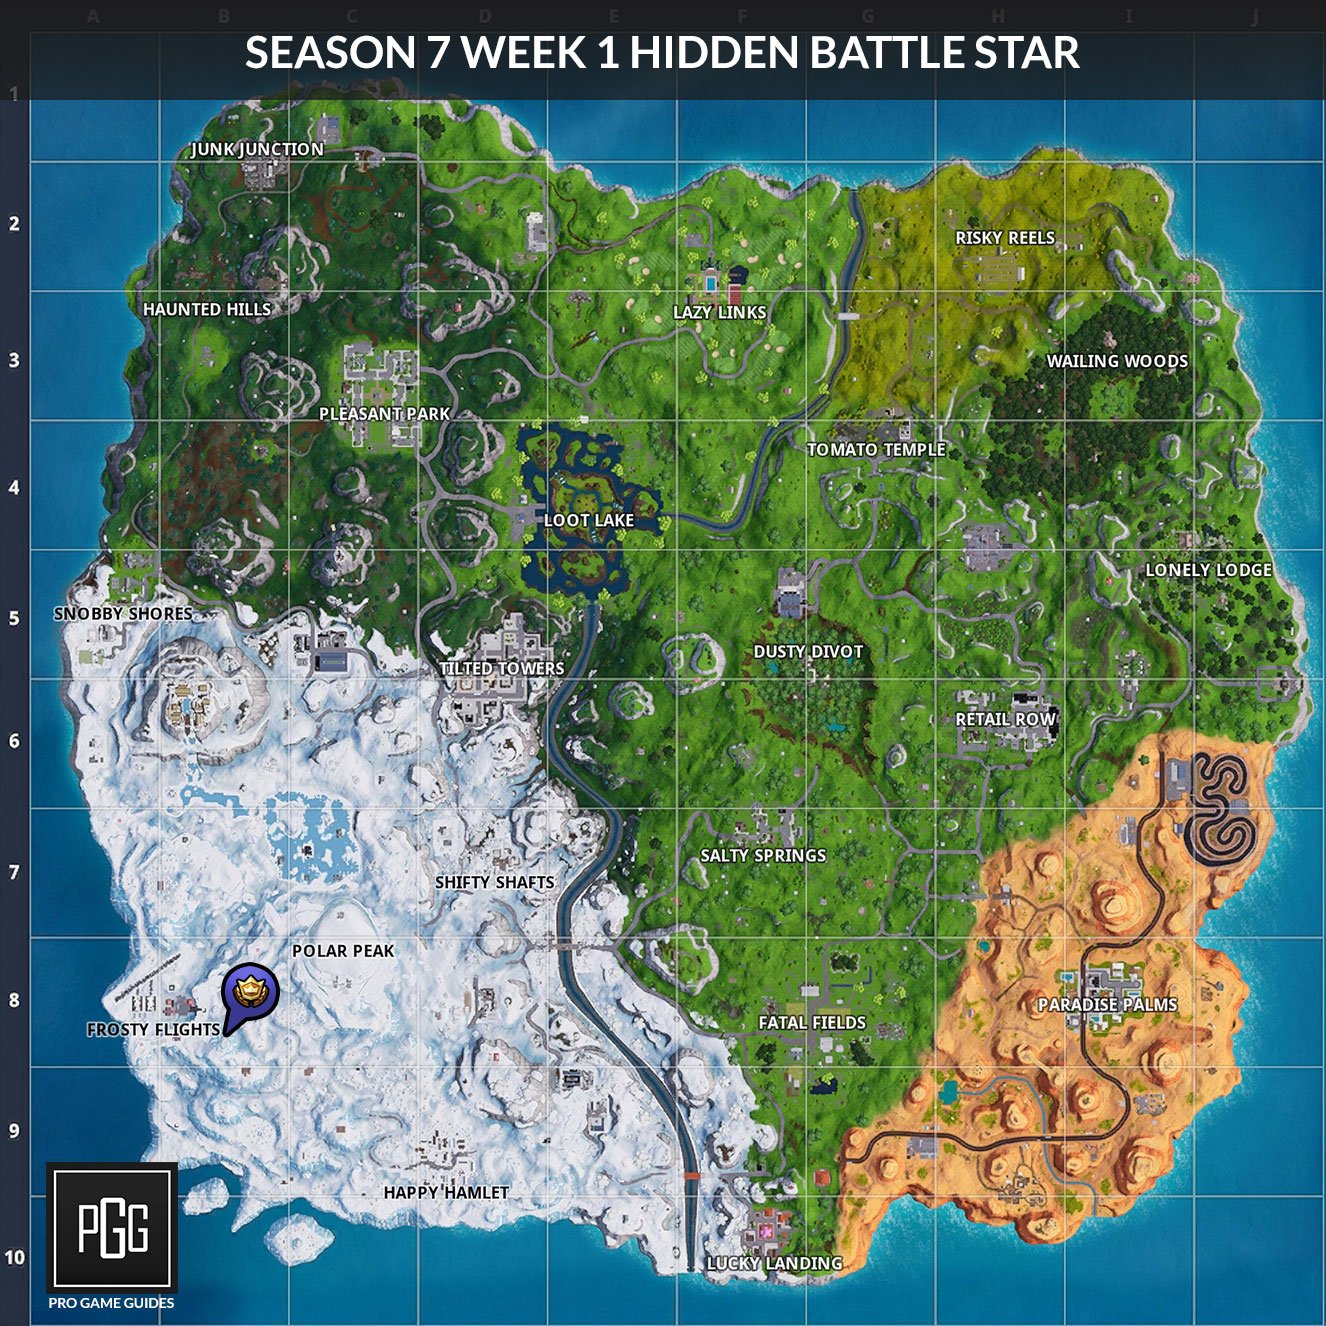 head over to near frosty flights you can find the star to the east of this area make sure you ve finished all your challenges or it won t appear - fortnite cheat sheet week 1